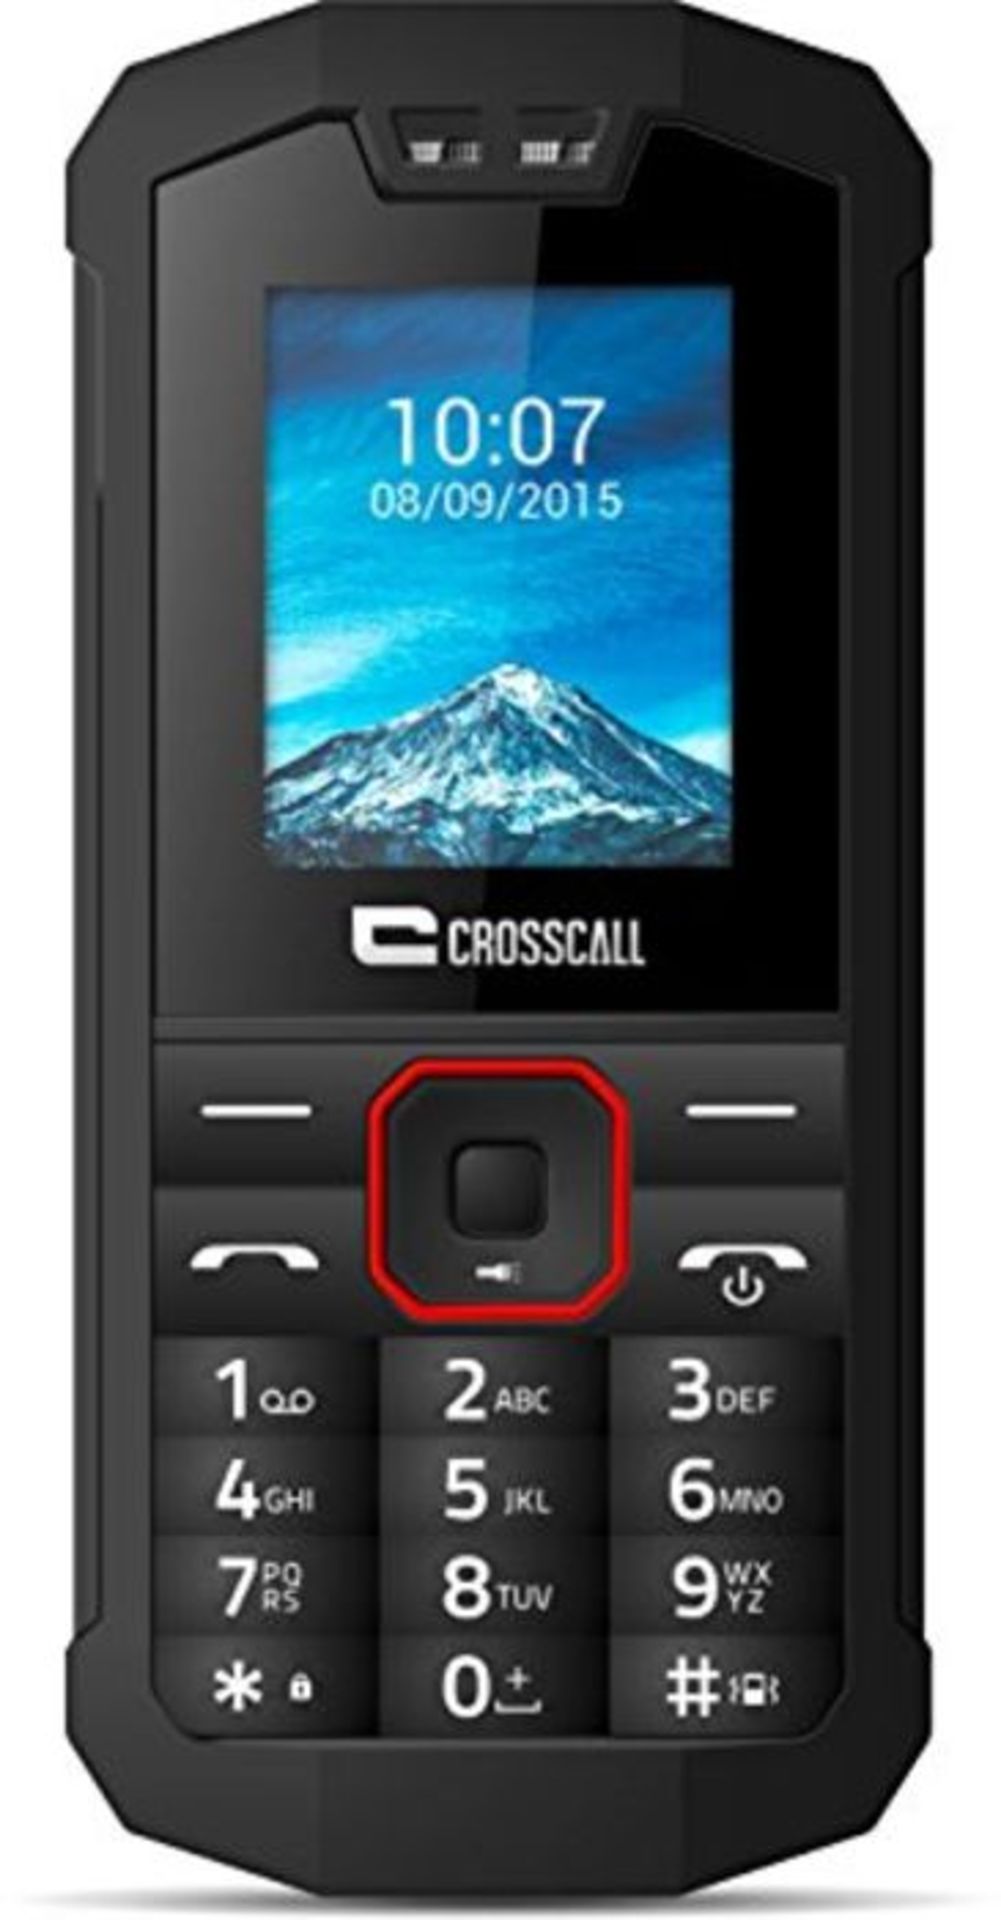 RRP £55.00 Crosscall Spider-X1 Unlocked Mobile Phone 2G (Screen: 1.77 inches - 32 MB ROM - Dual S